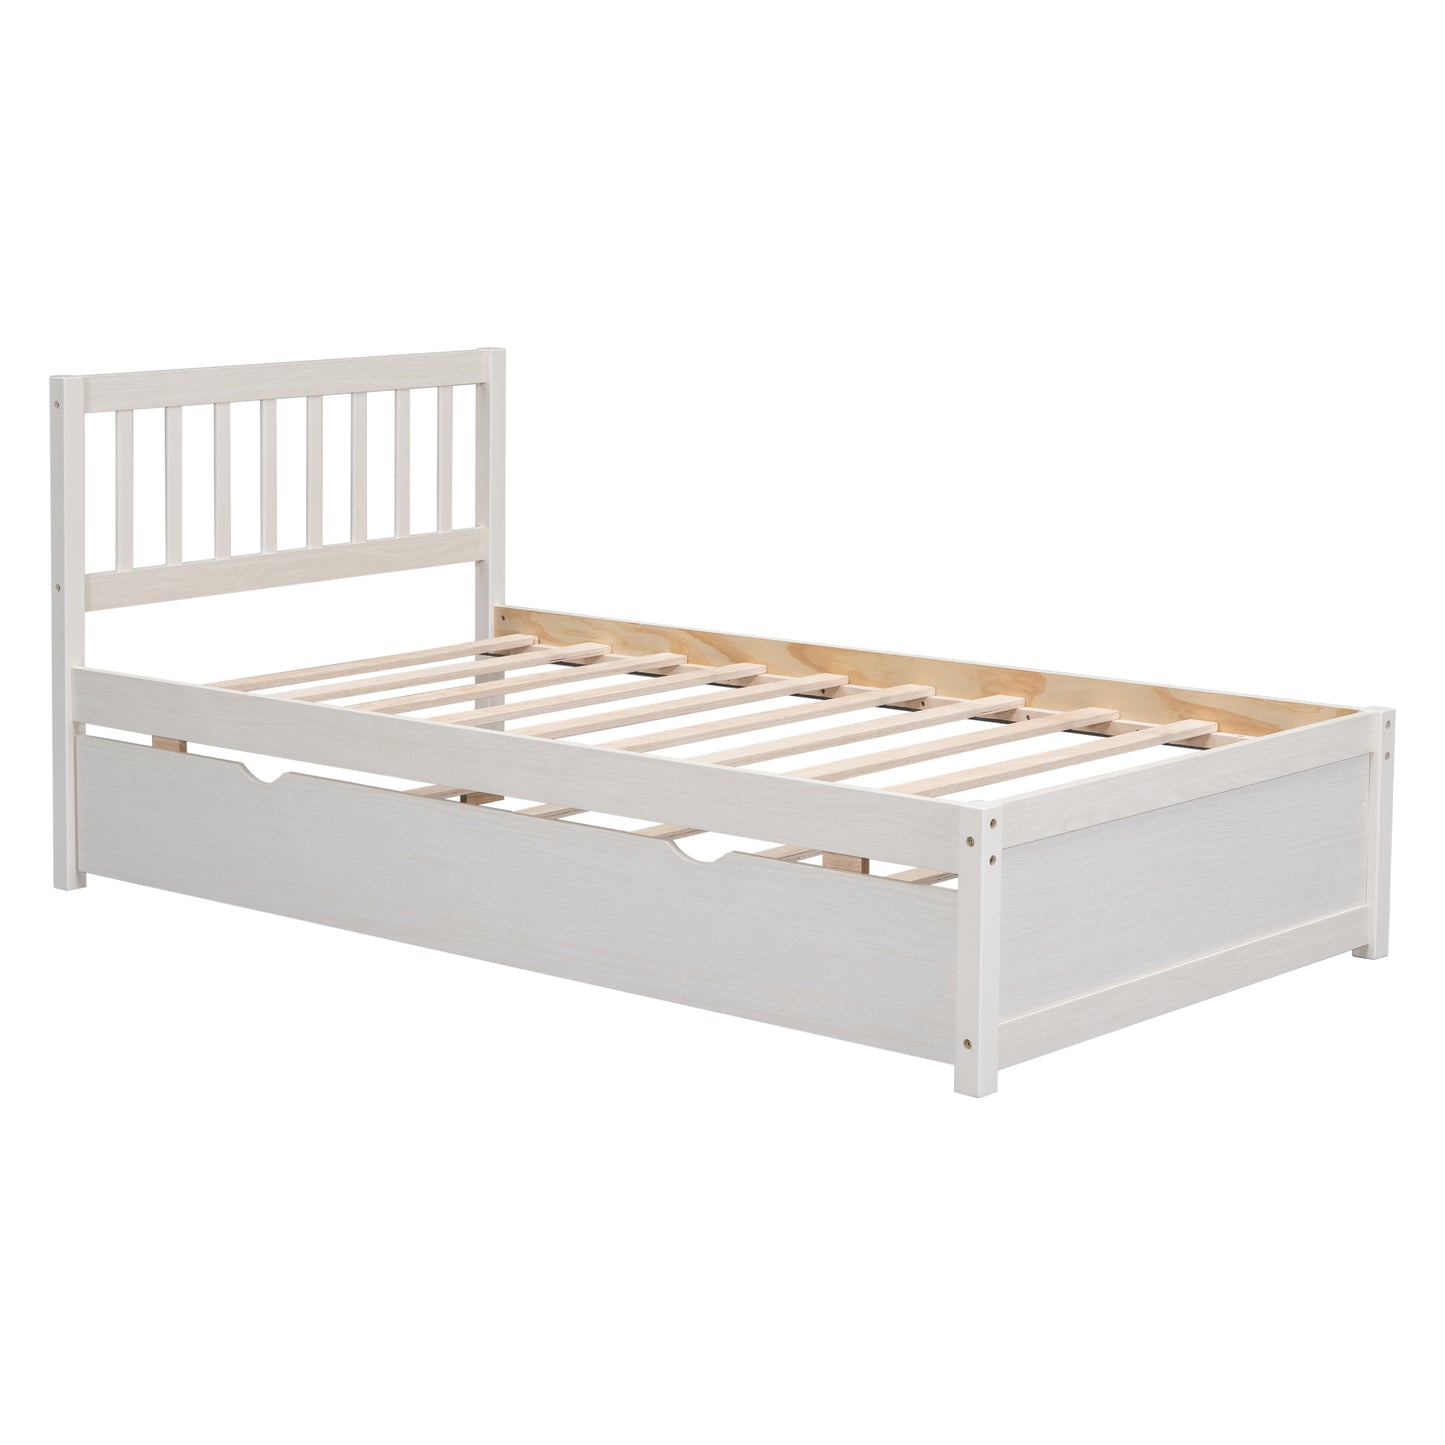 Wooden Twin Size Platform Bed Frame with Trundle for White Washed Color